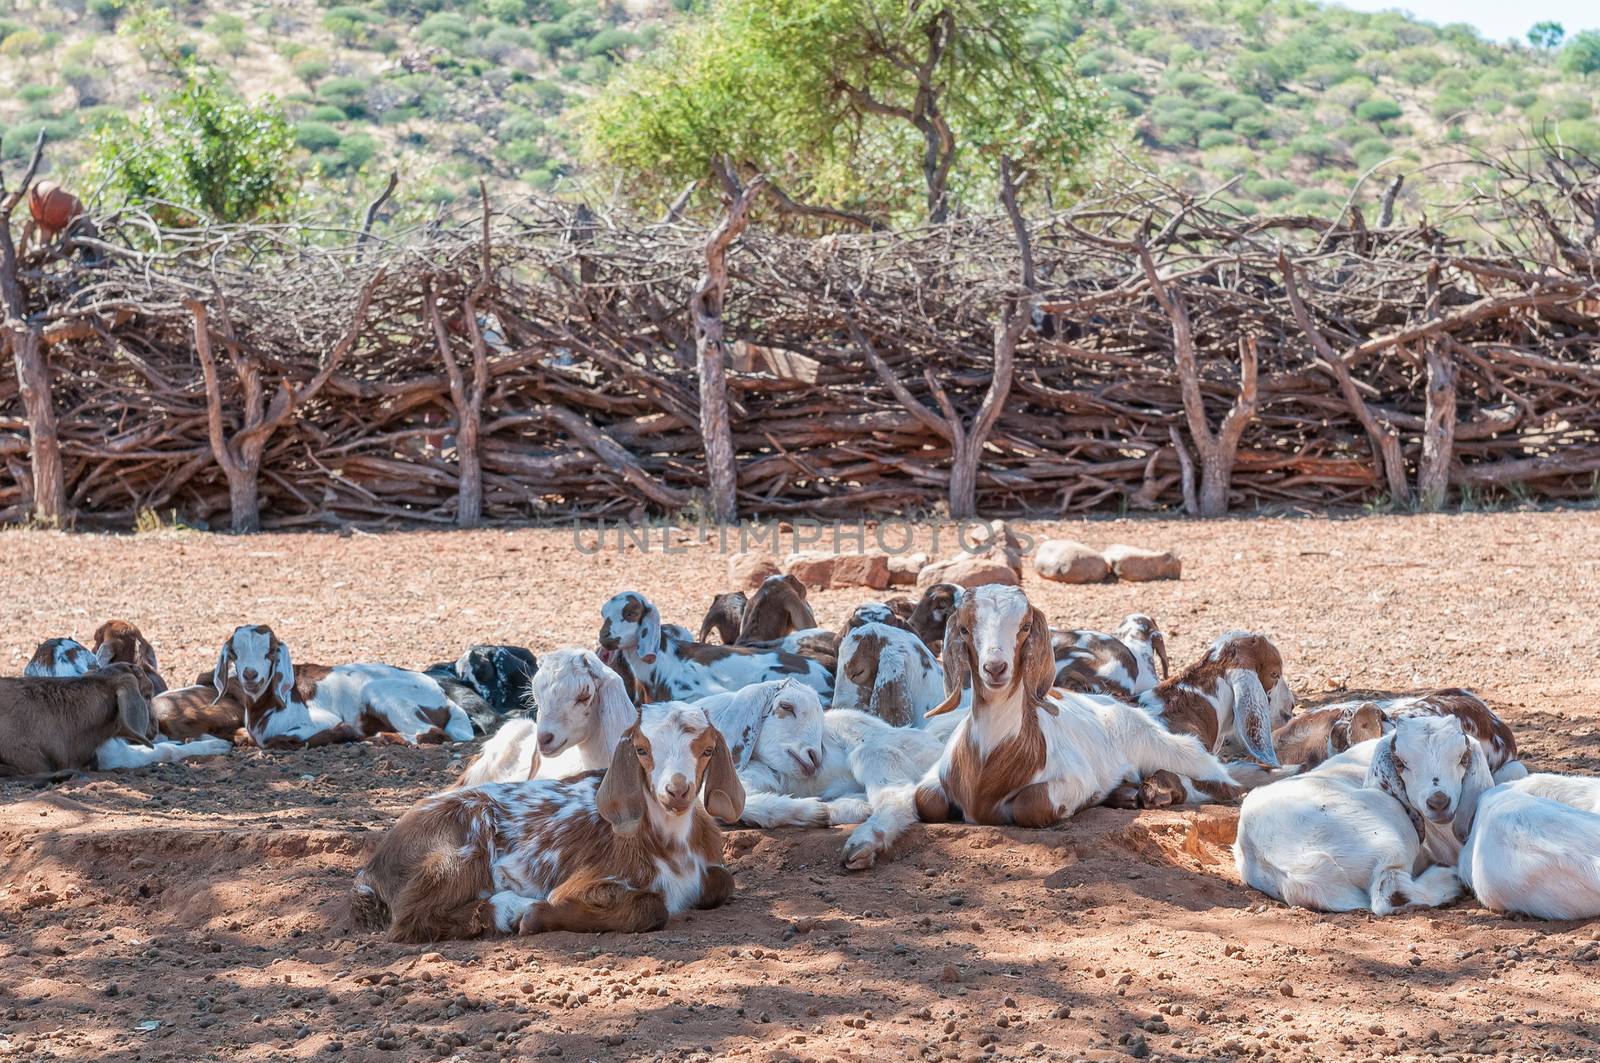 Goats lying in the shade of a tree in a Himba village near Epupa